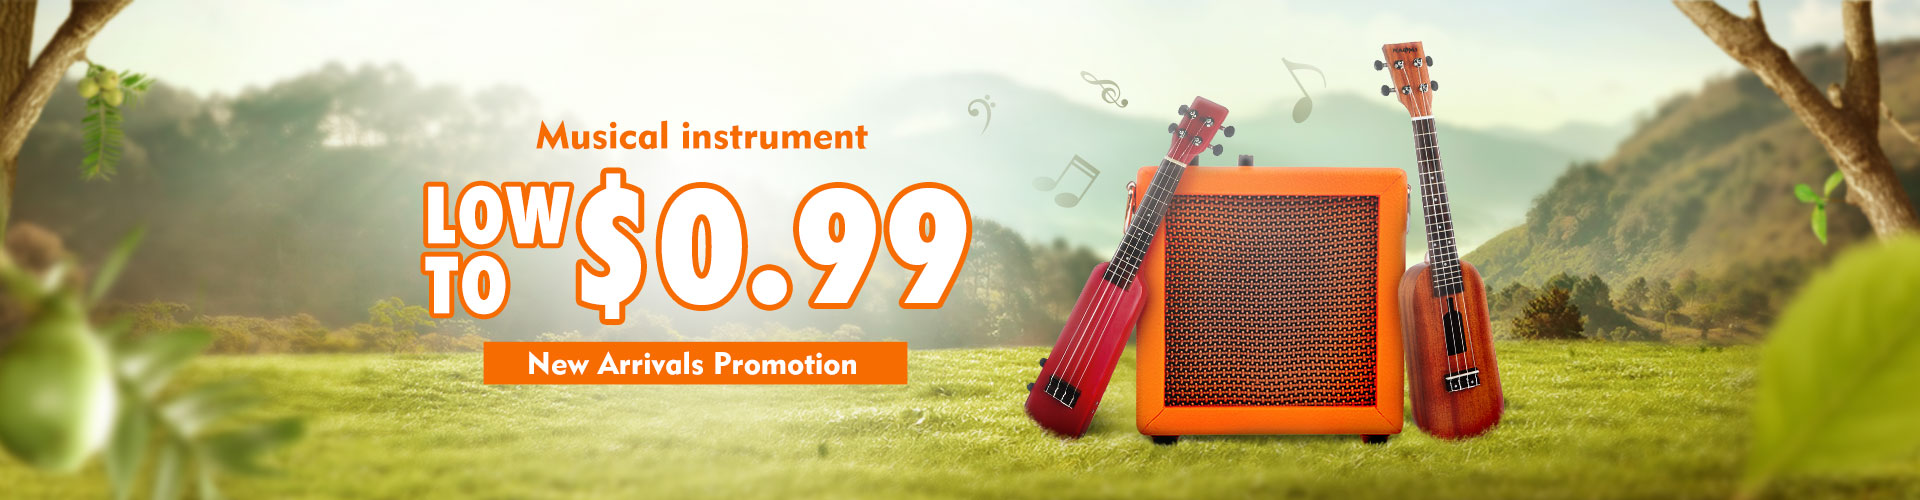 25% OFF for Musical instrument New Arrivels Promotion